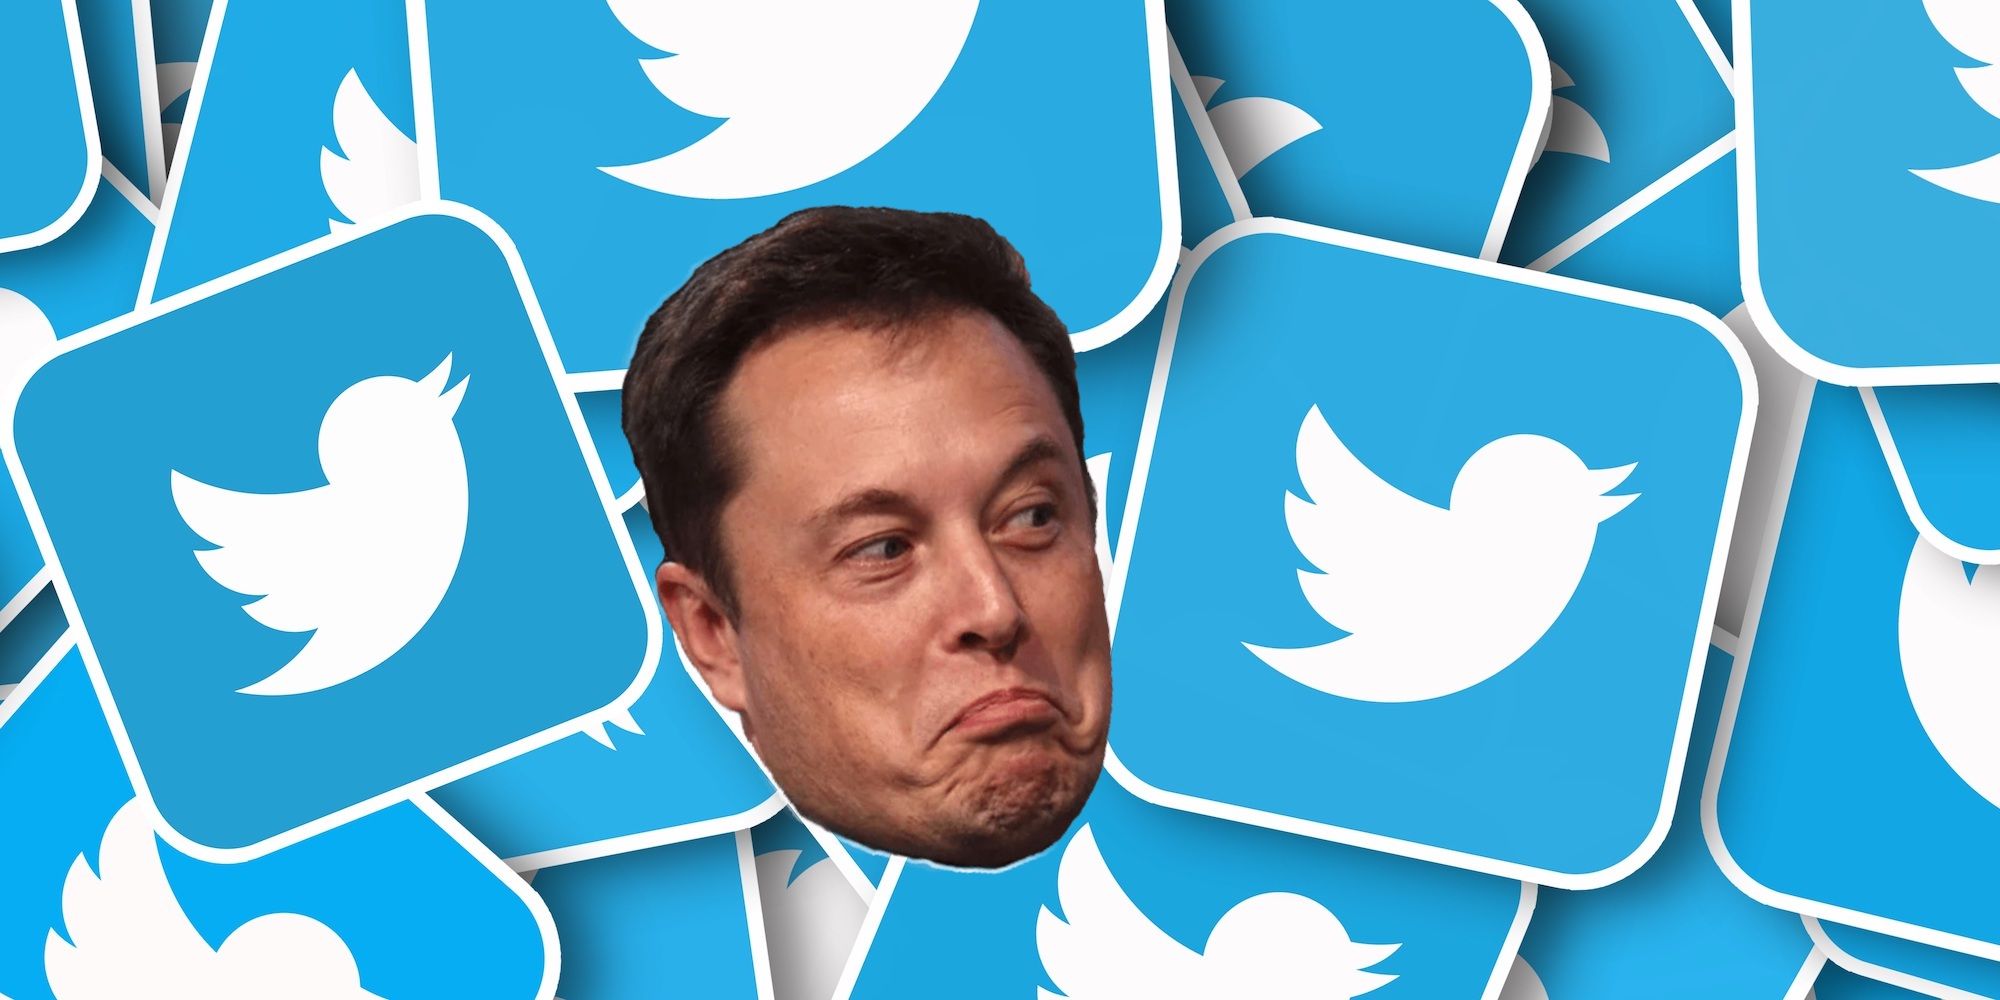 Elon Musk’s Twitter Poll Results Are In, And Users Want Him Gone